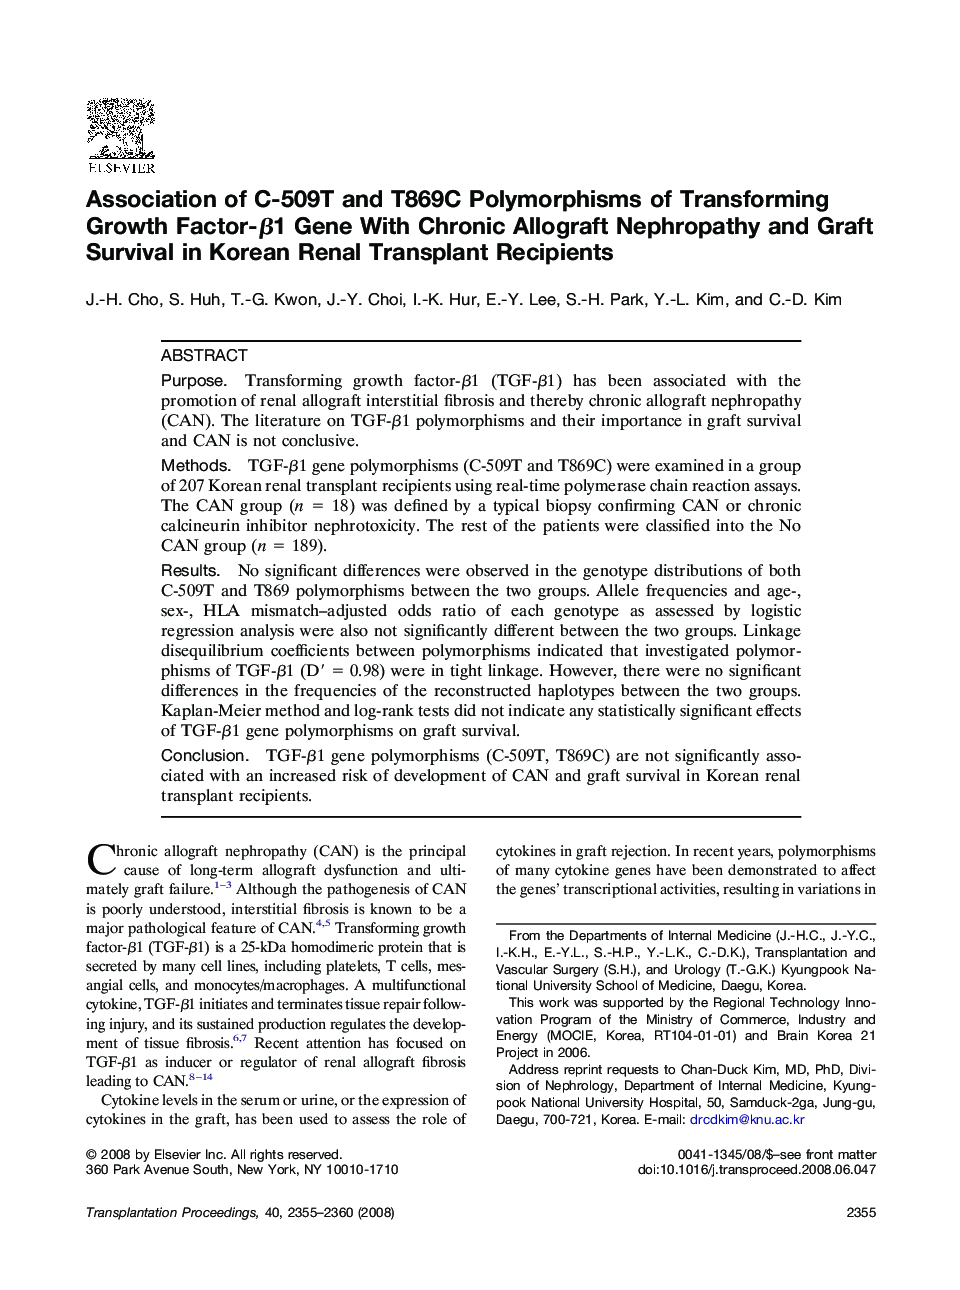 Association of C-509T and T869C Polymorphisms of Transforming Growth Factor-β1 Gene With Chronic Allograft Nephropathy and Graft Survival in Korean Renal Transplant Recipients 